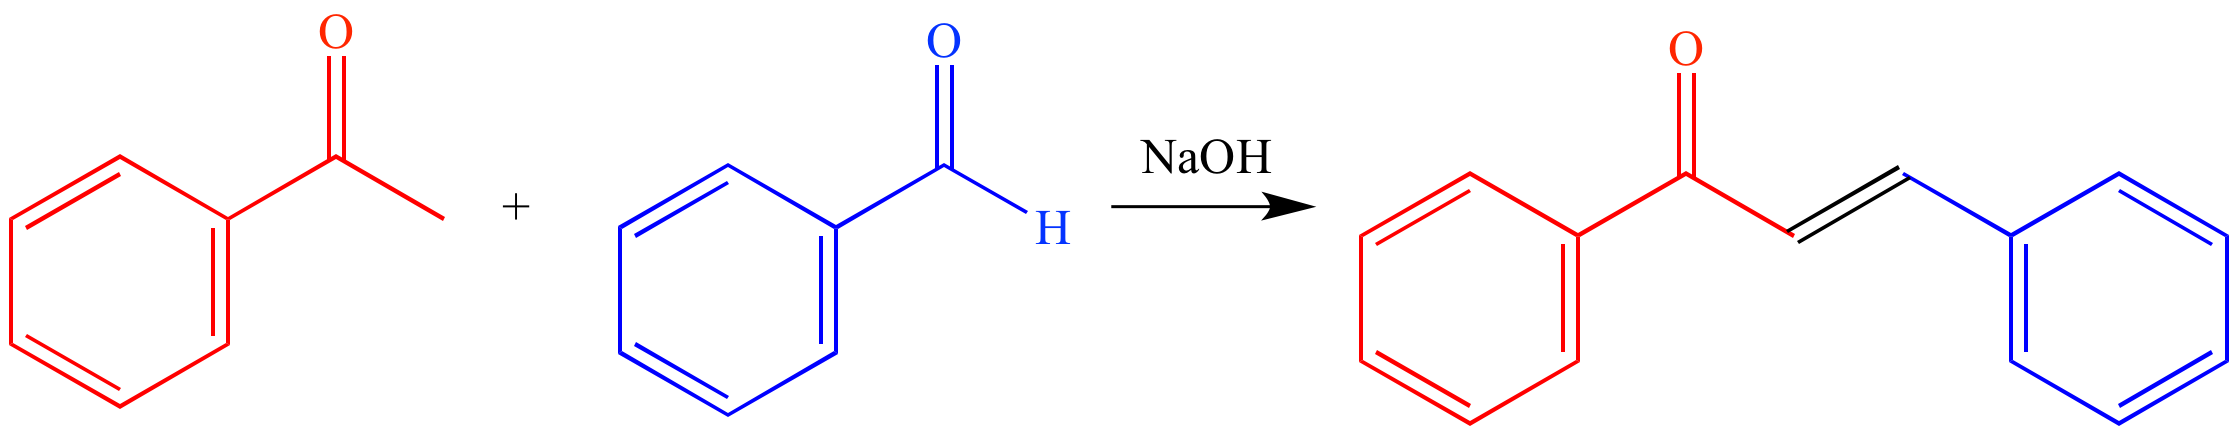 chalcone synthesis